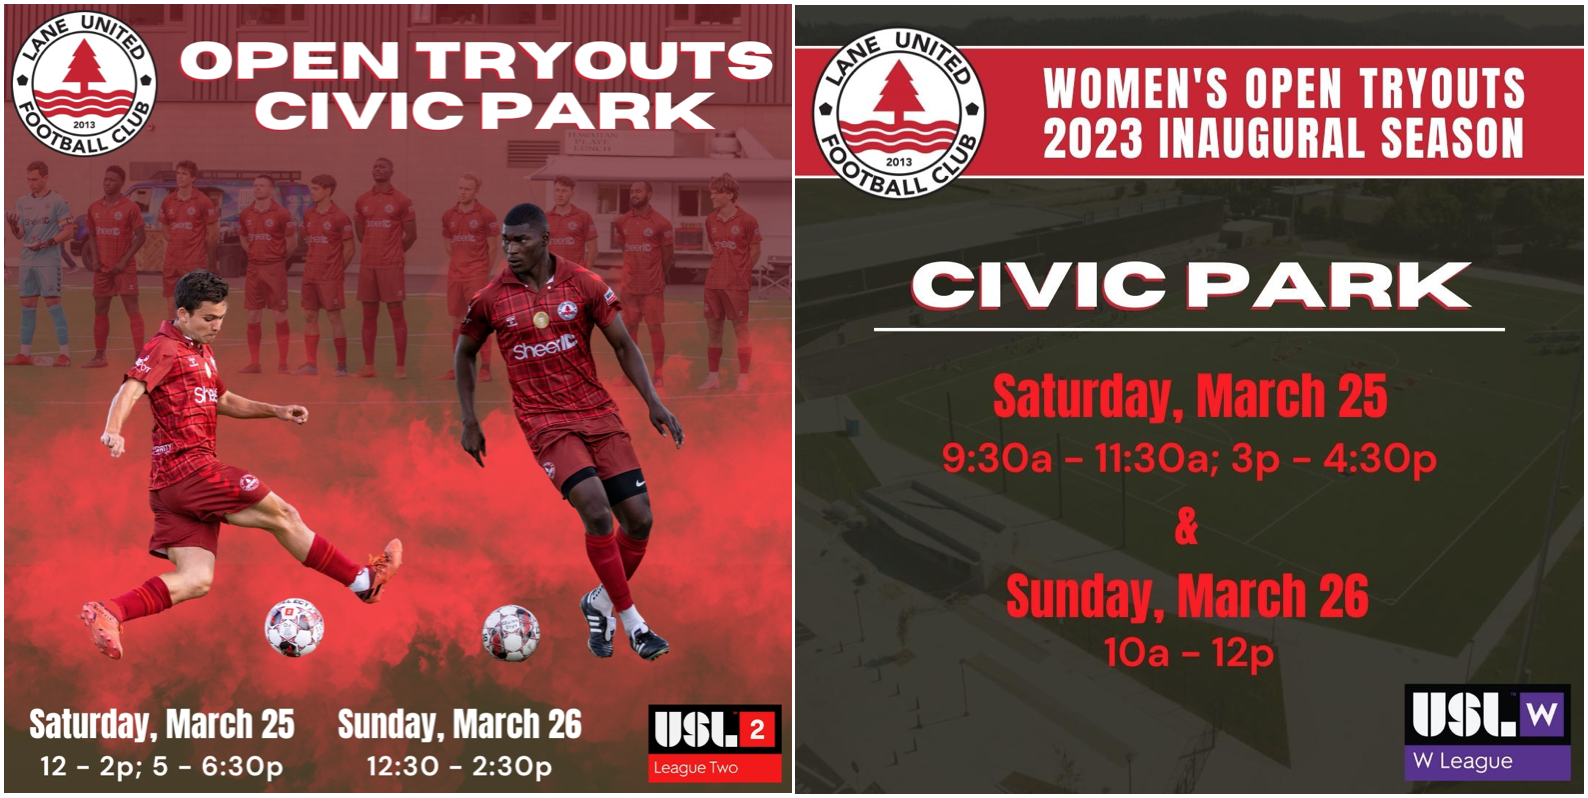 2023 Tryouts - Official Site of the United Football League